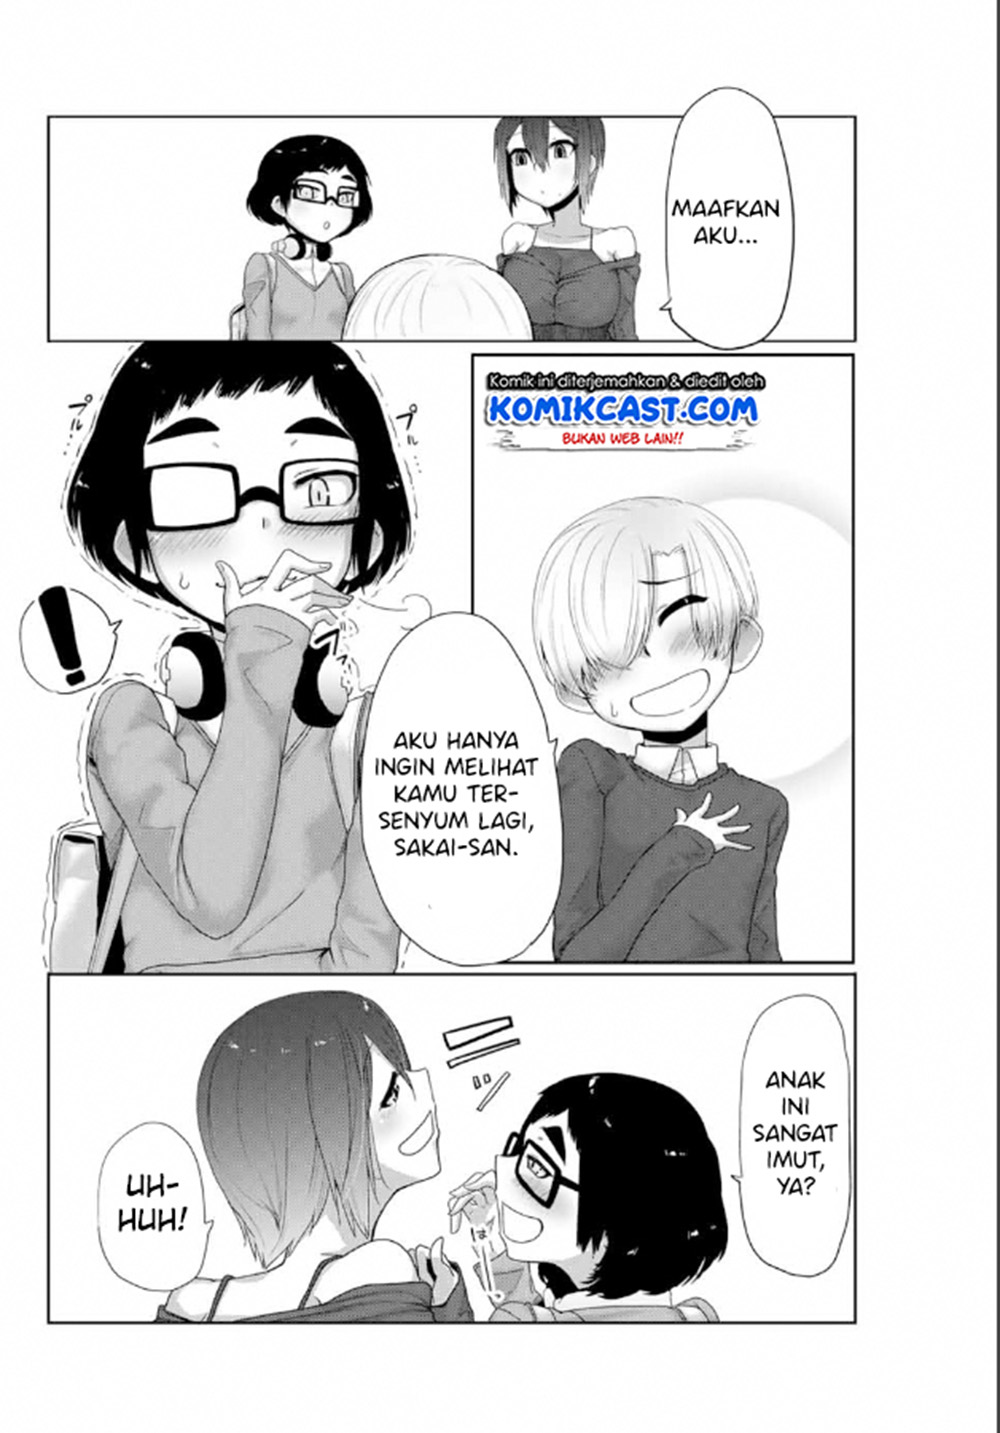 The Girl with a Kansai Accent and the Pure Boy Chapter 07 11